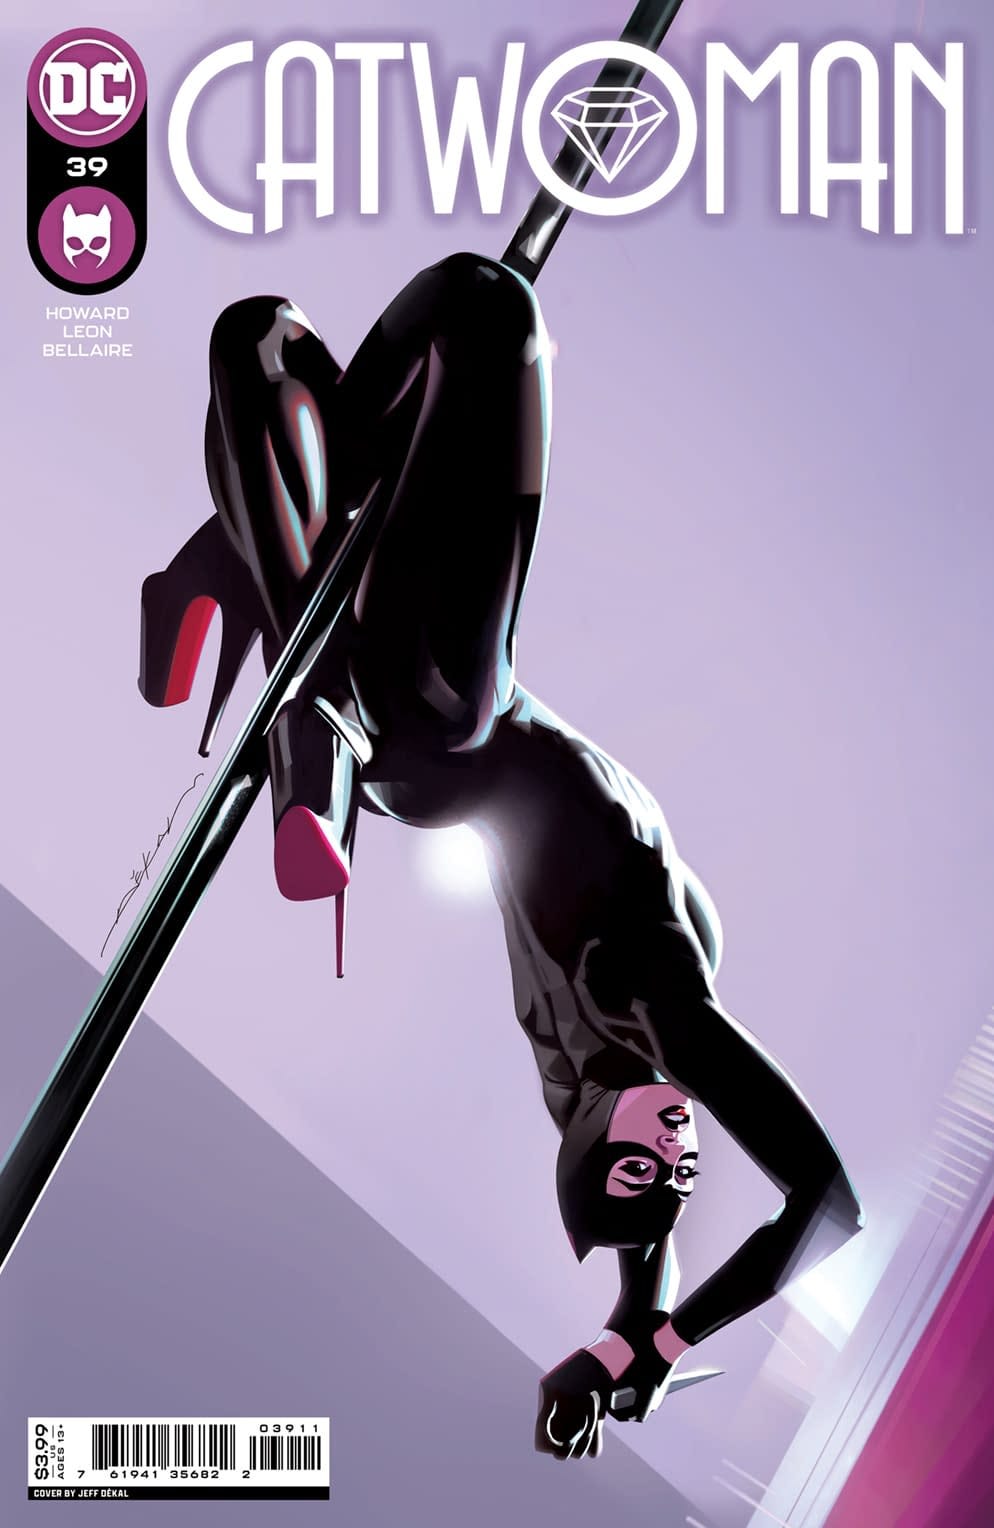 Catwoman #39 Preview: Catwoman Takes Up Stripping